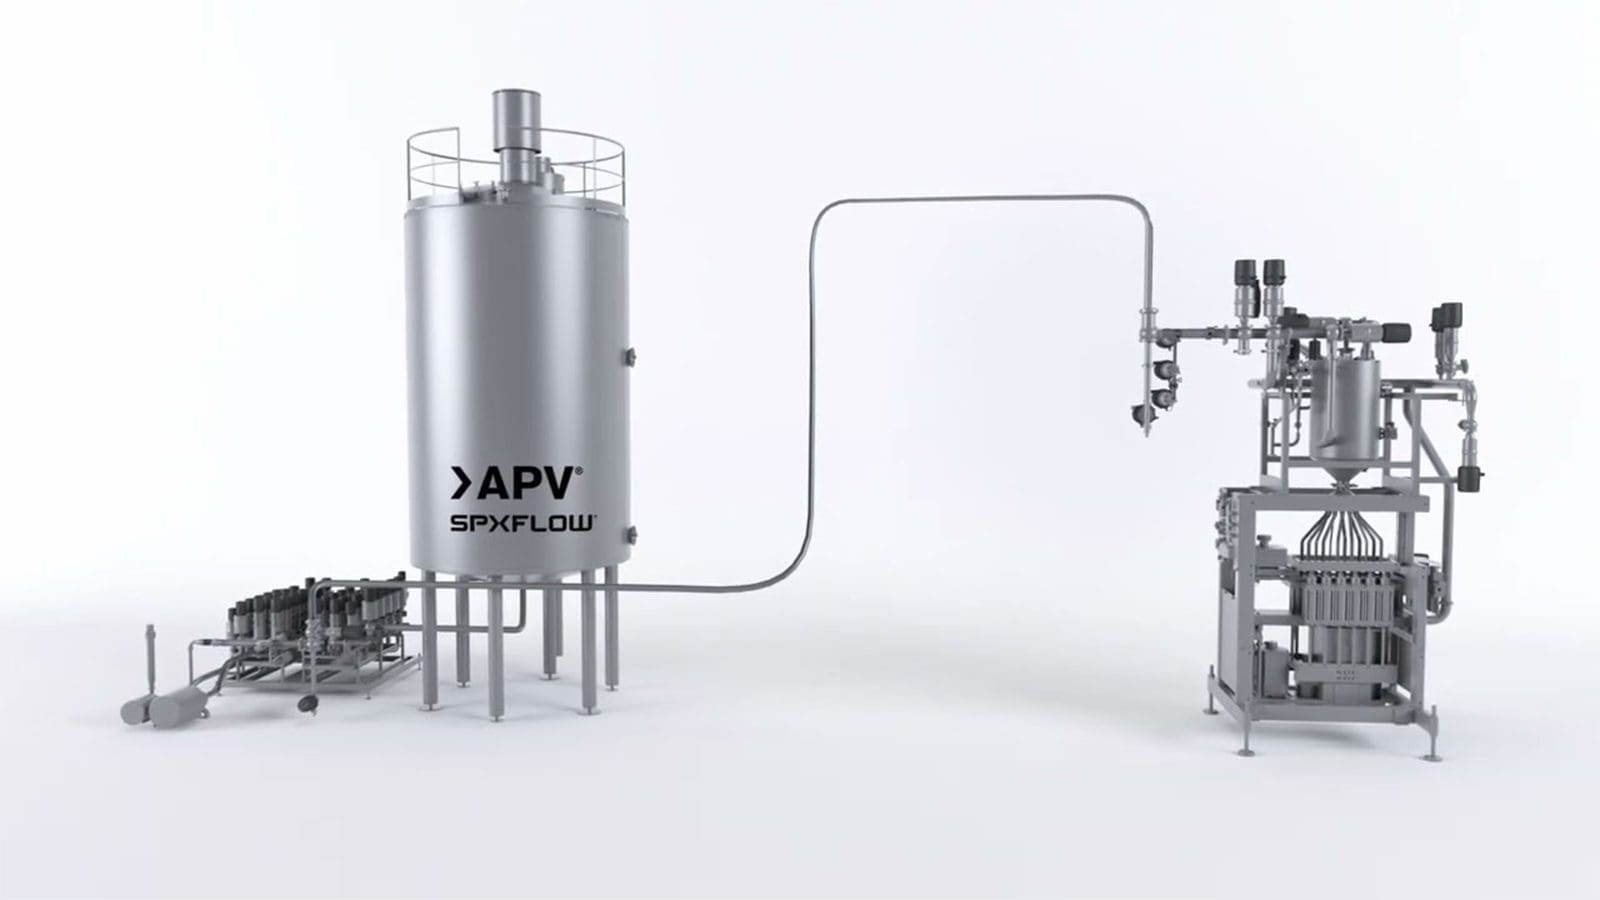 SPX FLOW launches new Aseptic Rapid Recovery System offering enhanced food safety